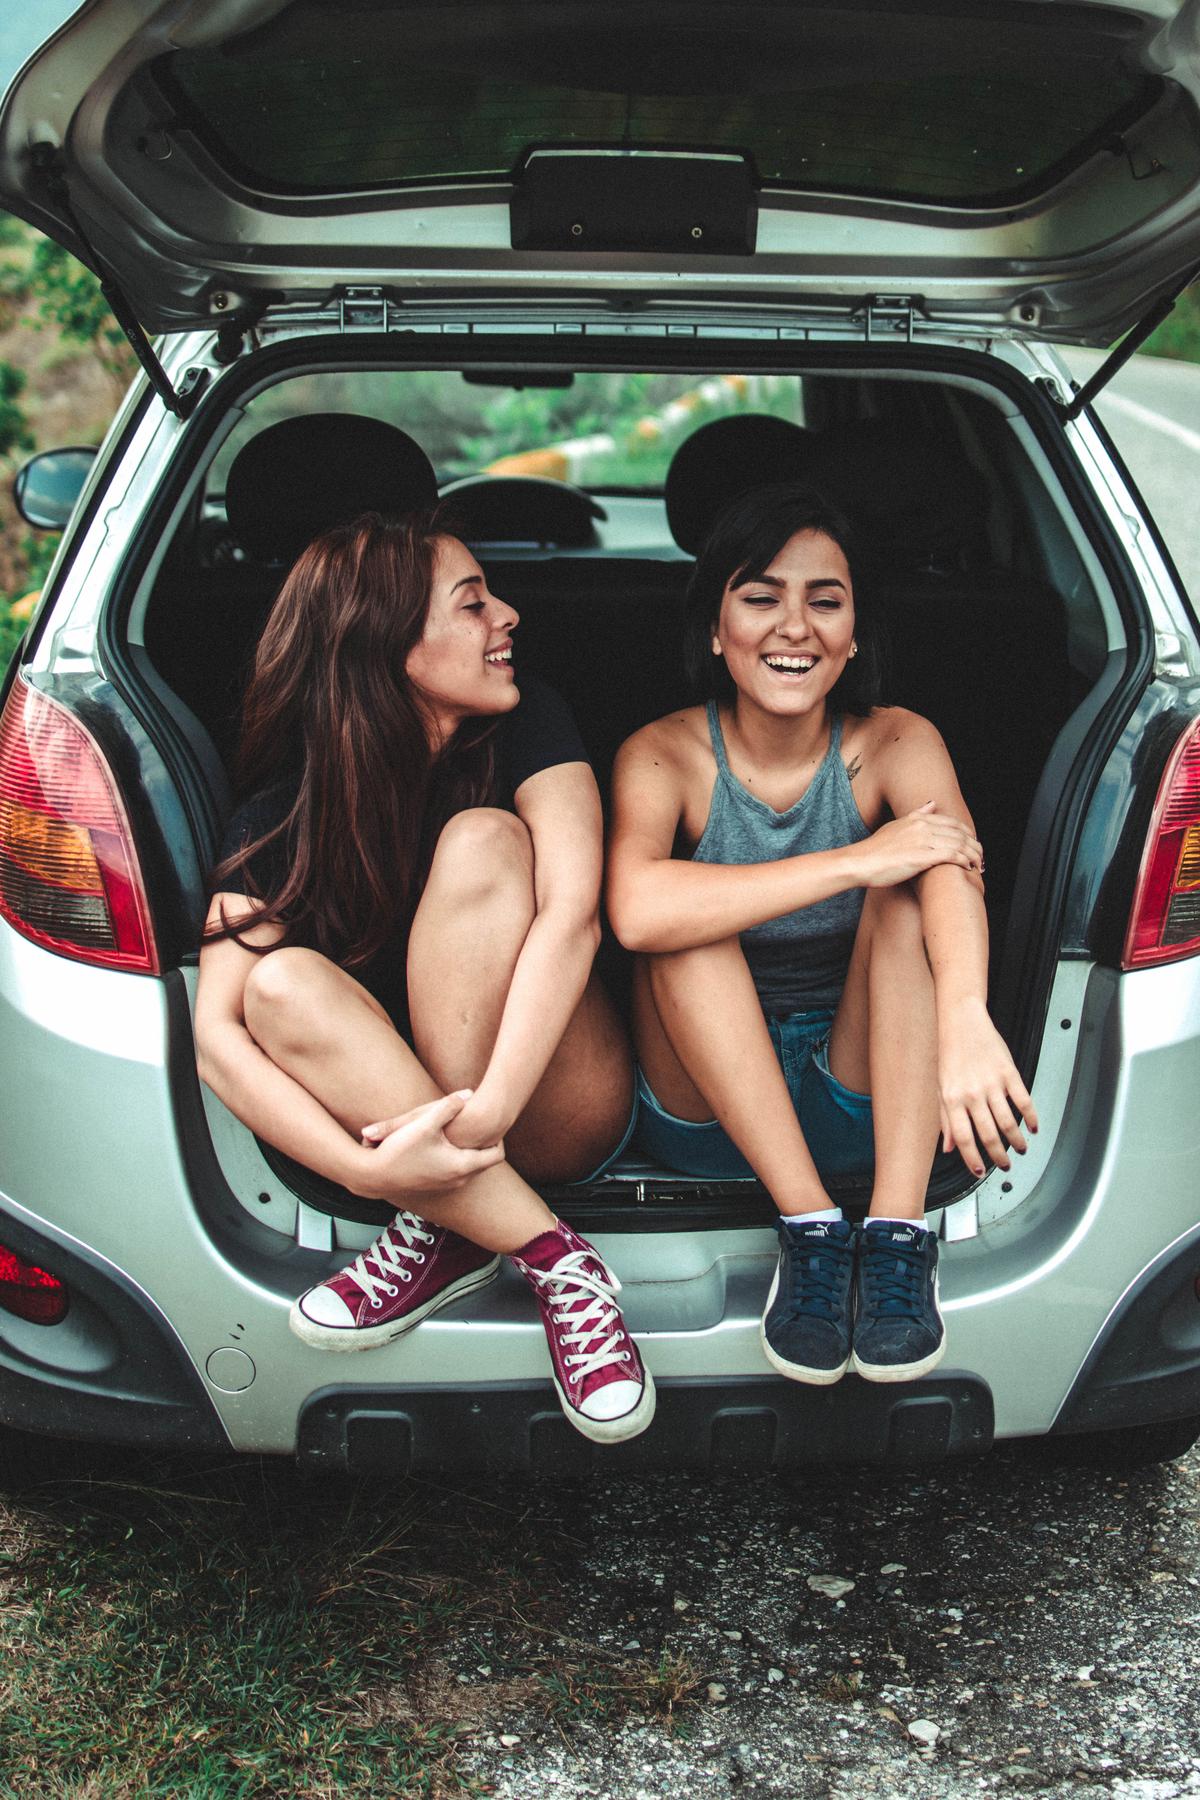 Road trips are bonding experiences that create lifelong memories with family and friends. (Jorge Saavedra/Unsplash)